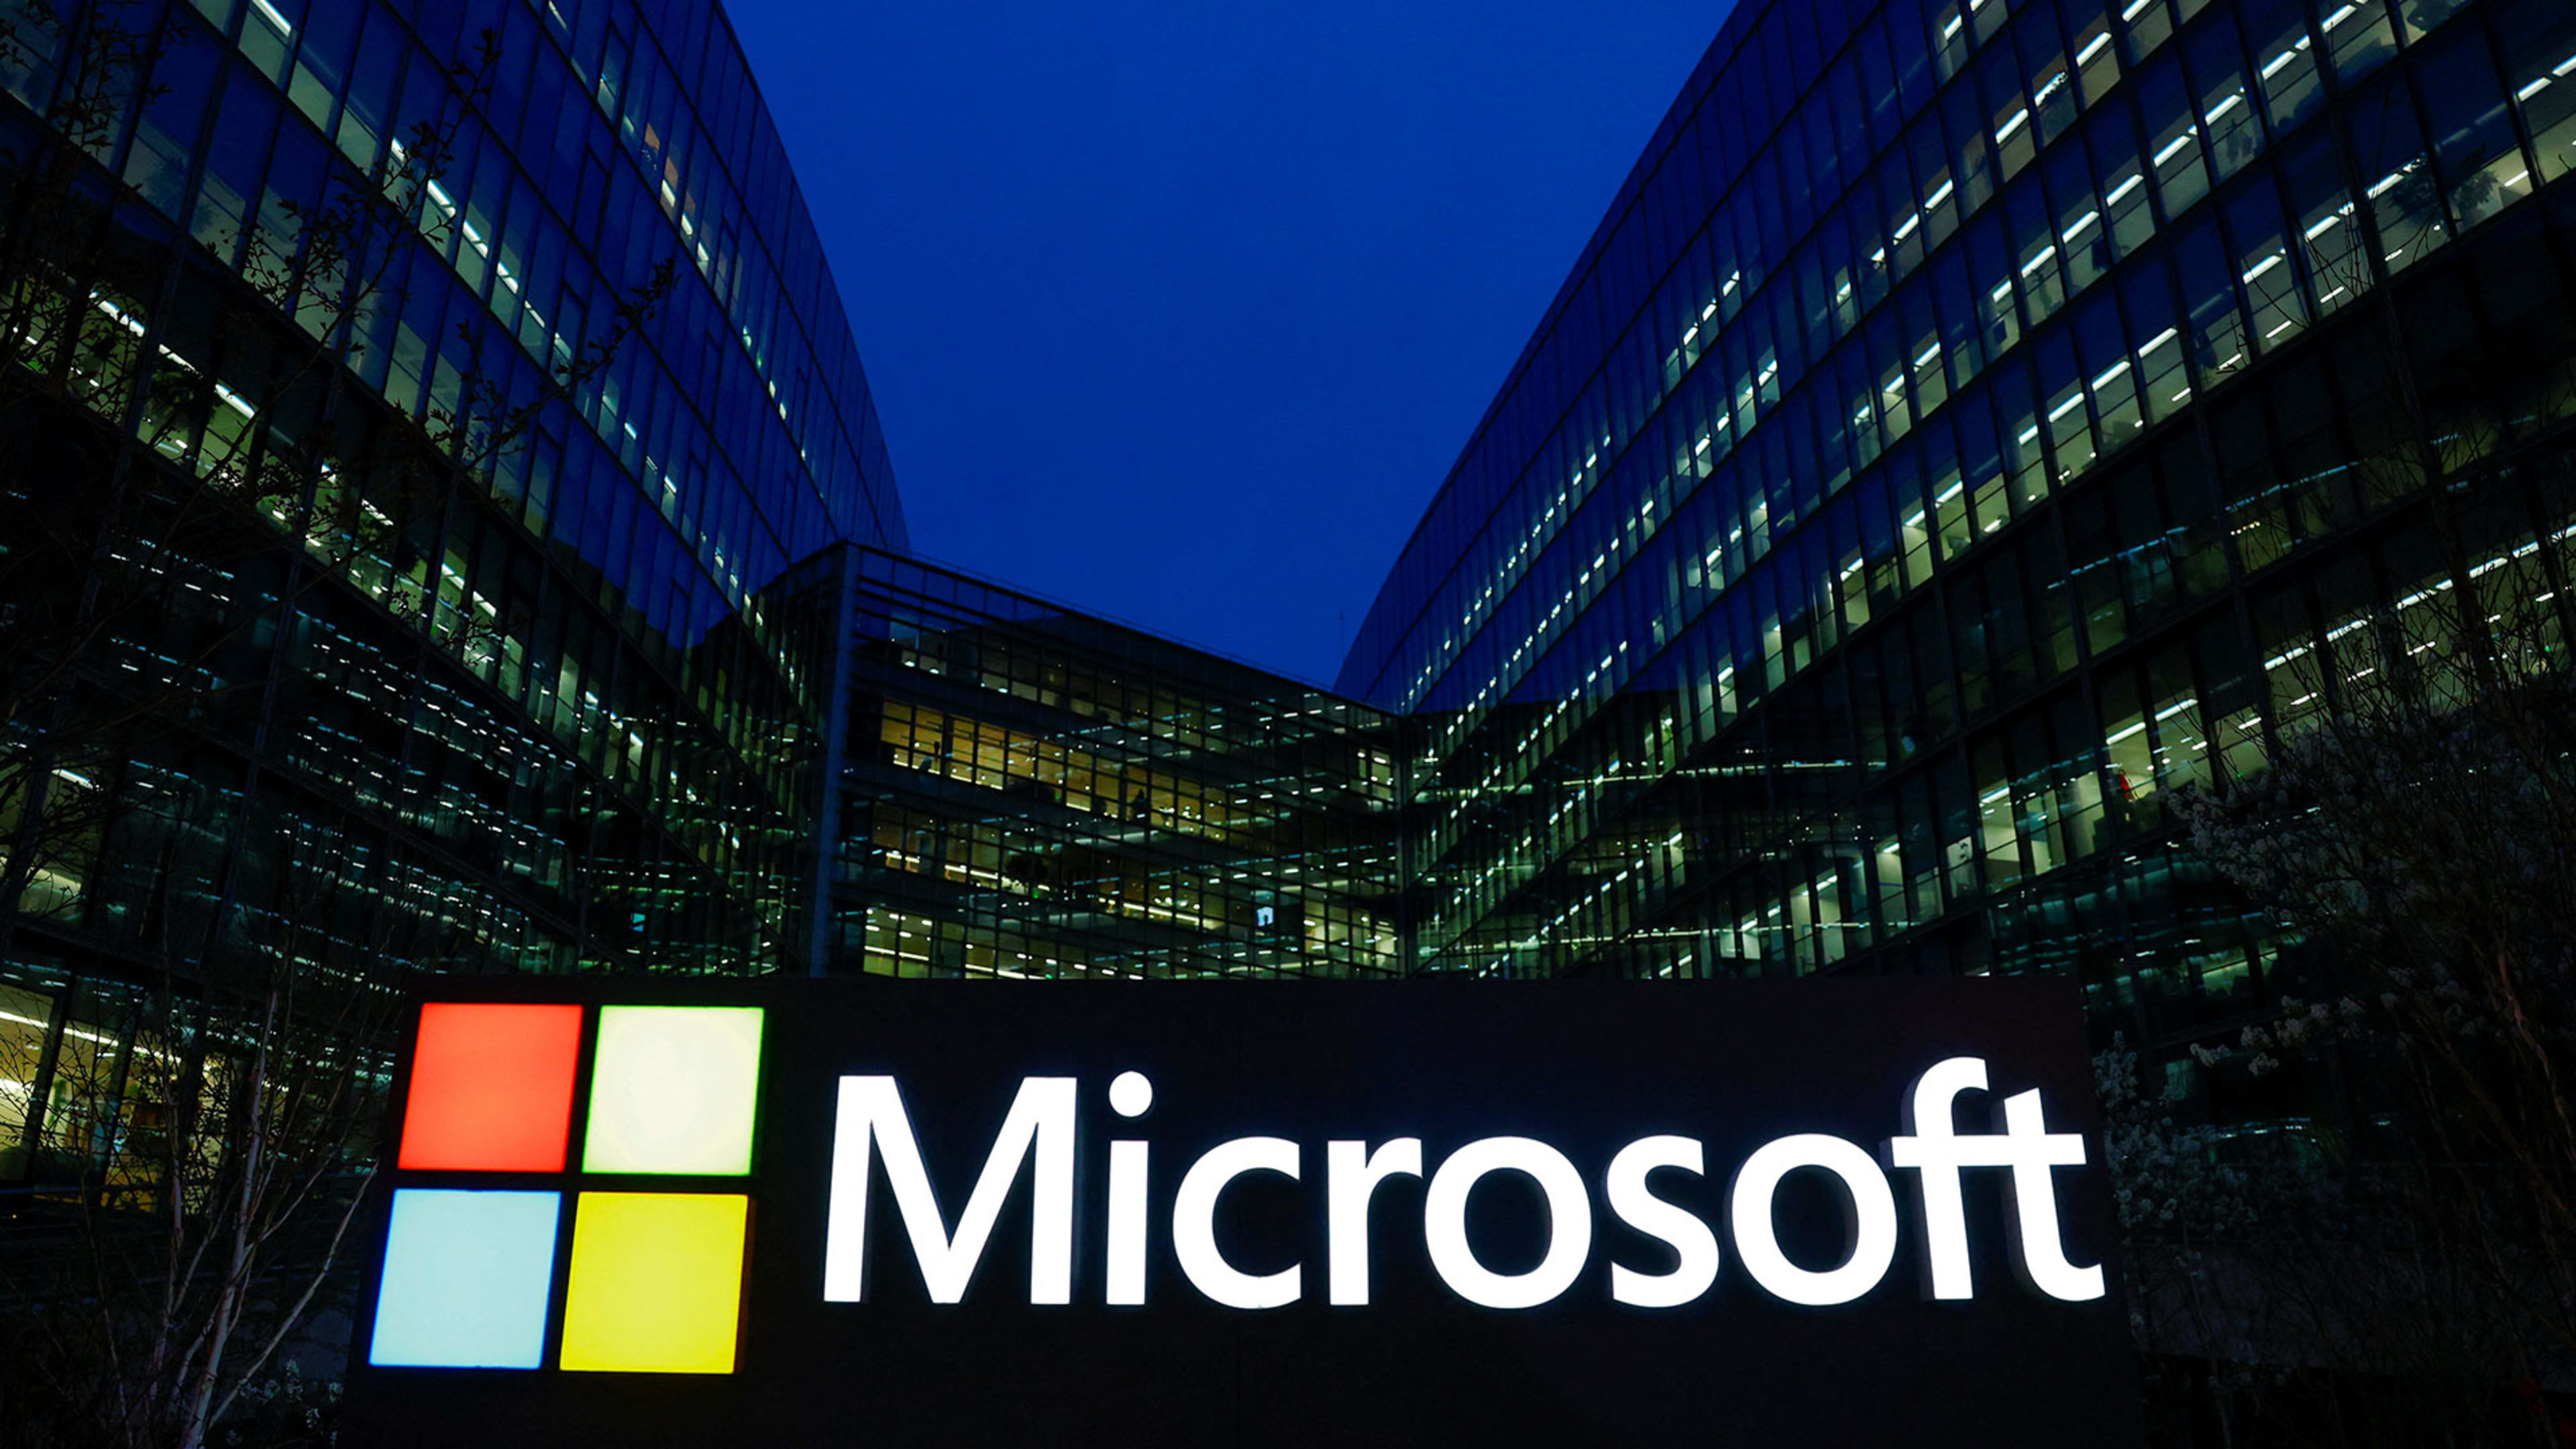 Microsoft’s antitrust issues surface again, this time with complaints from Spanish startups